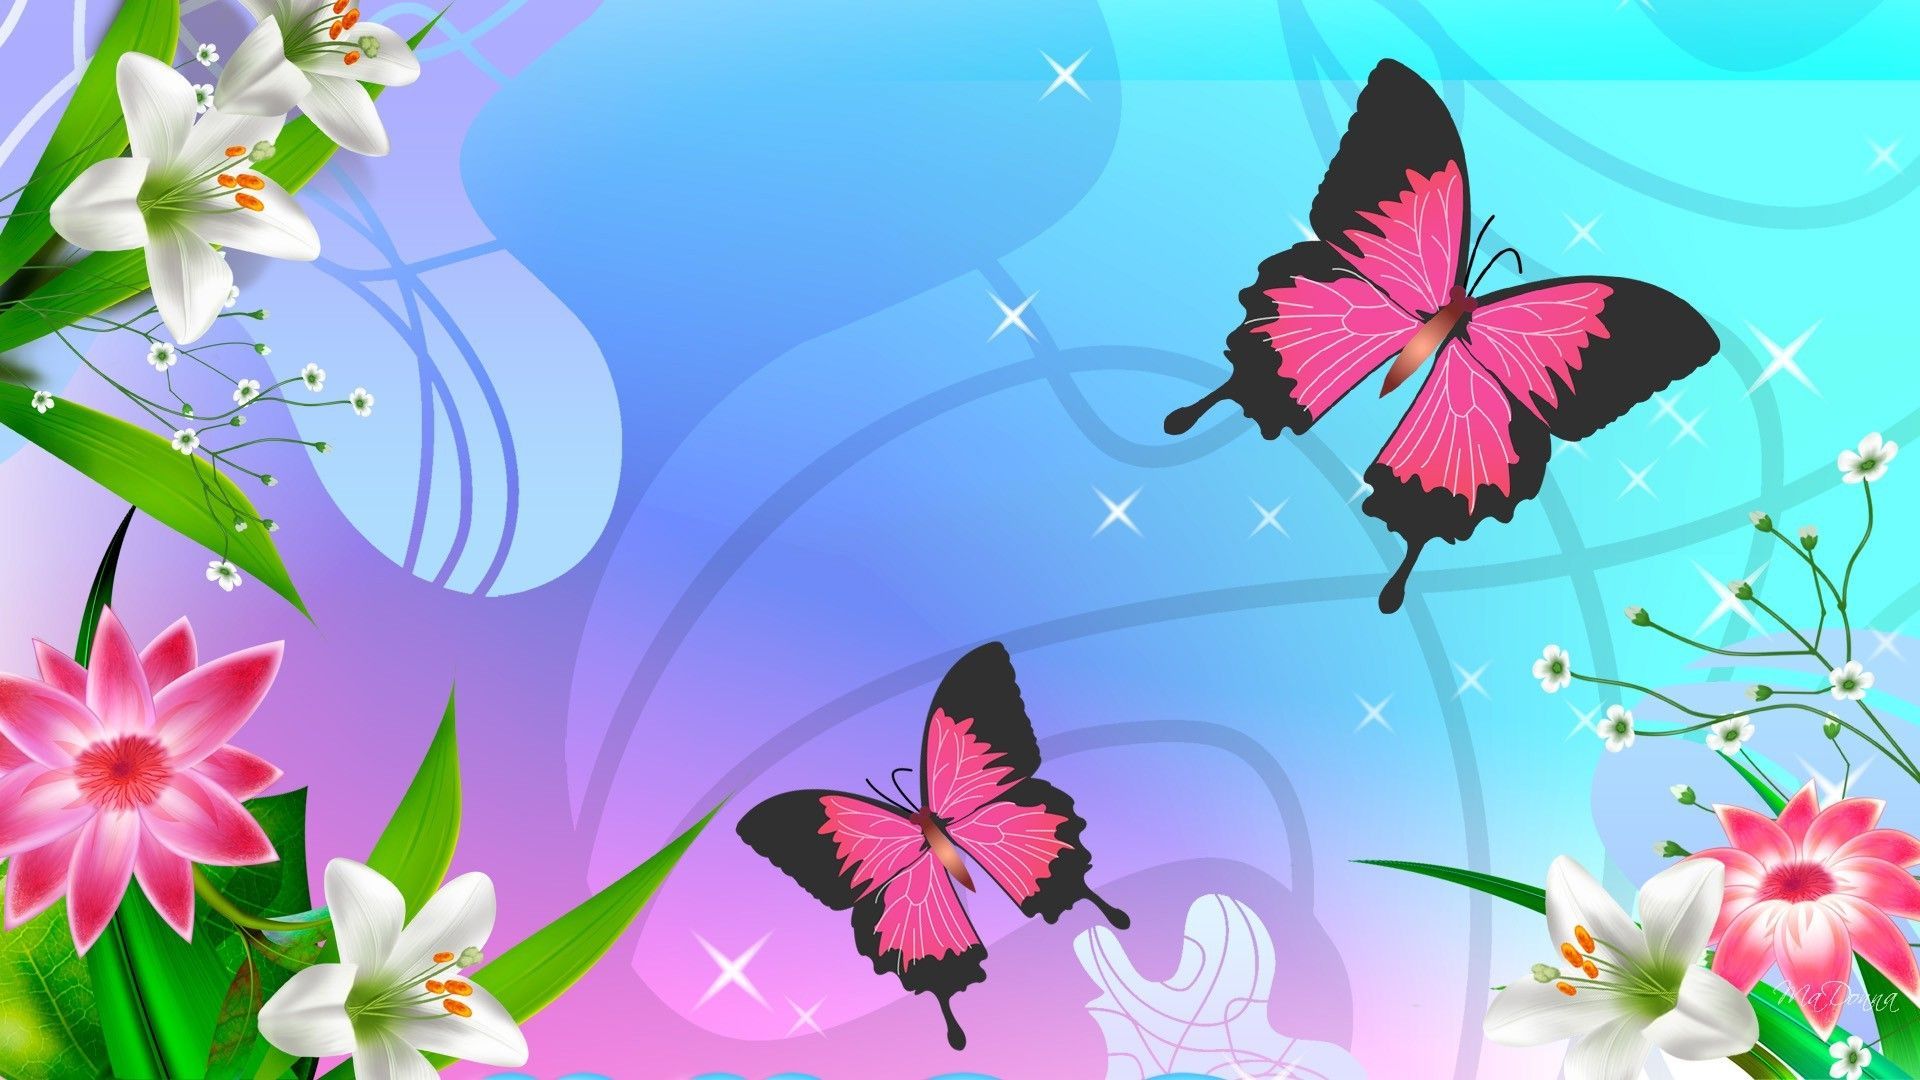 Download From Cute Butterfly Wallpaper 1920x1080 | Full HD Wallpapers